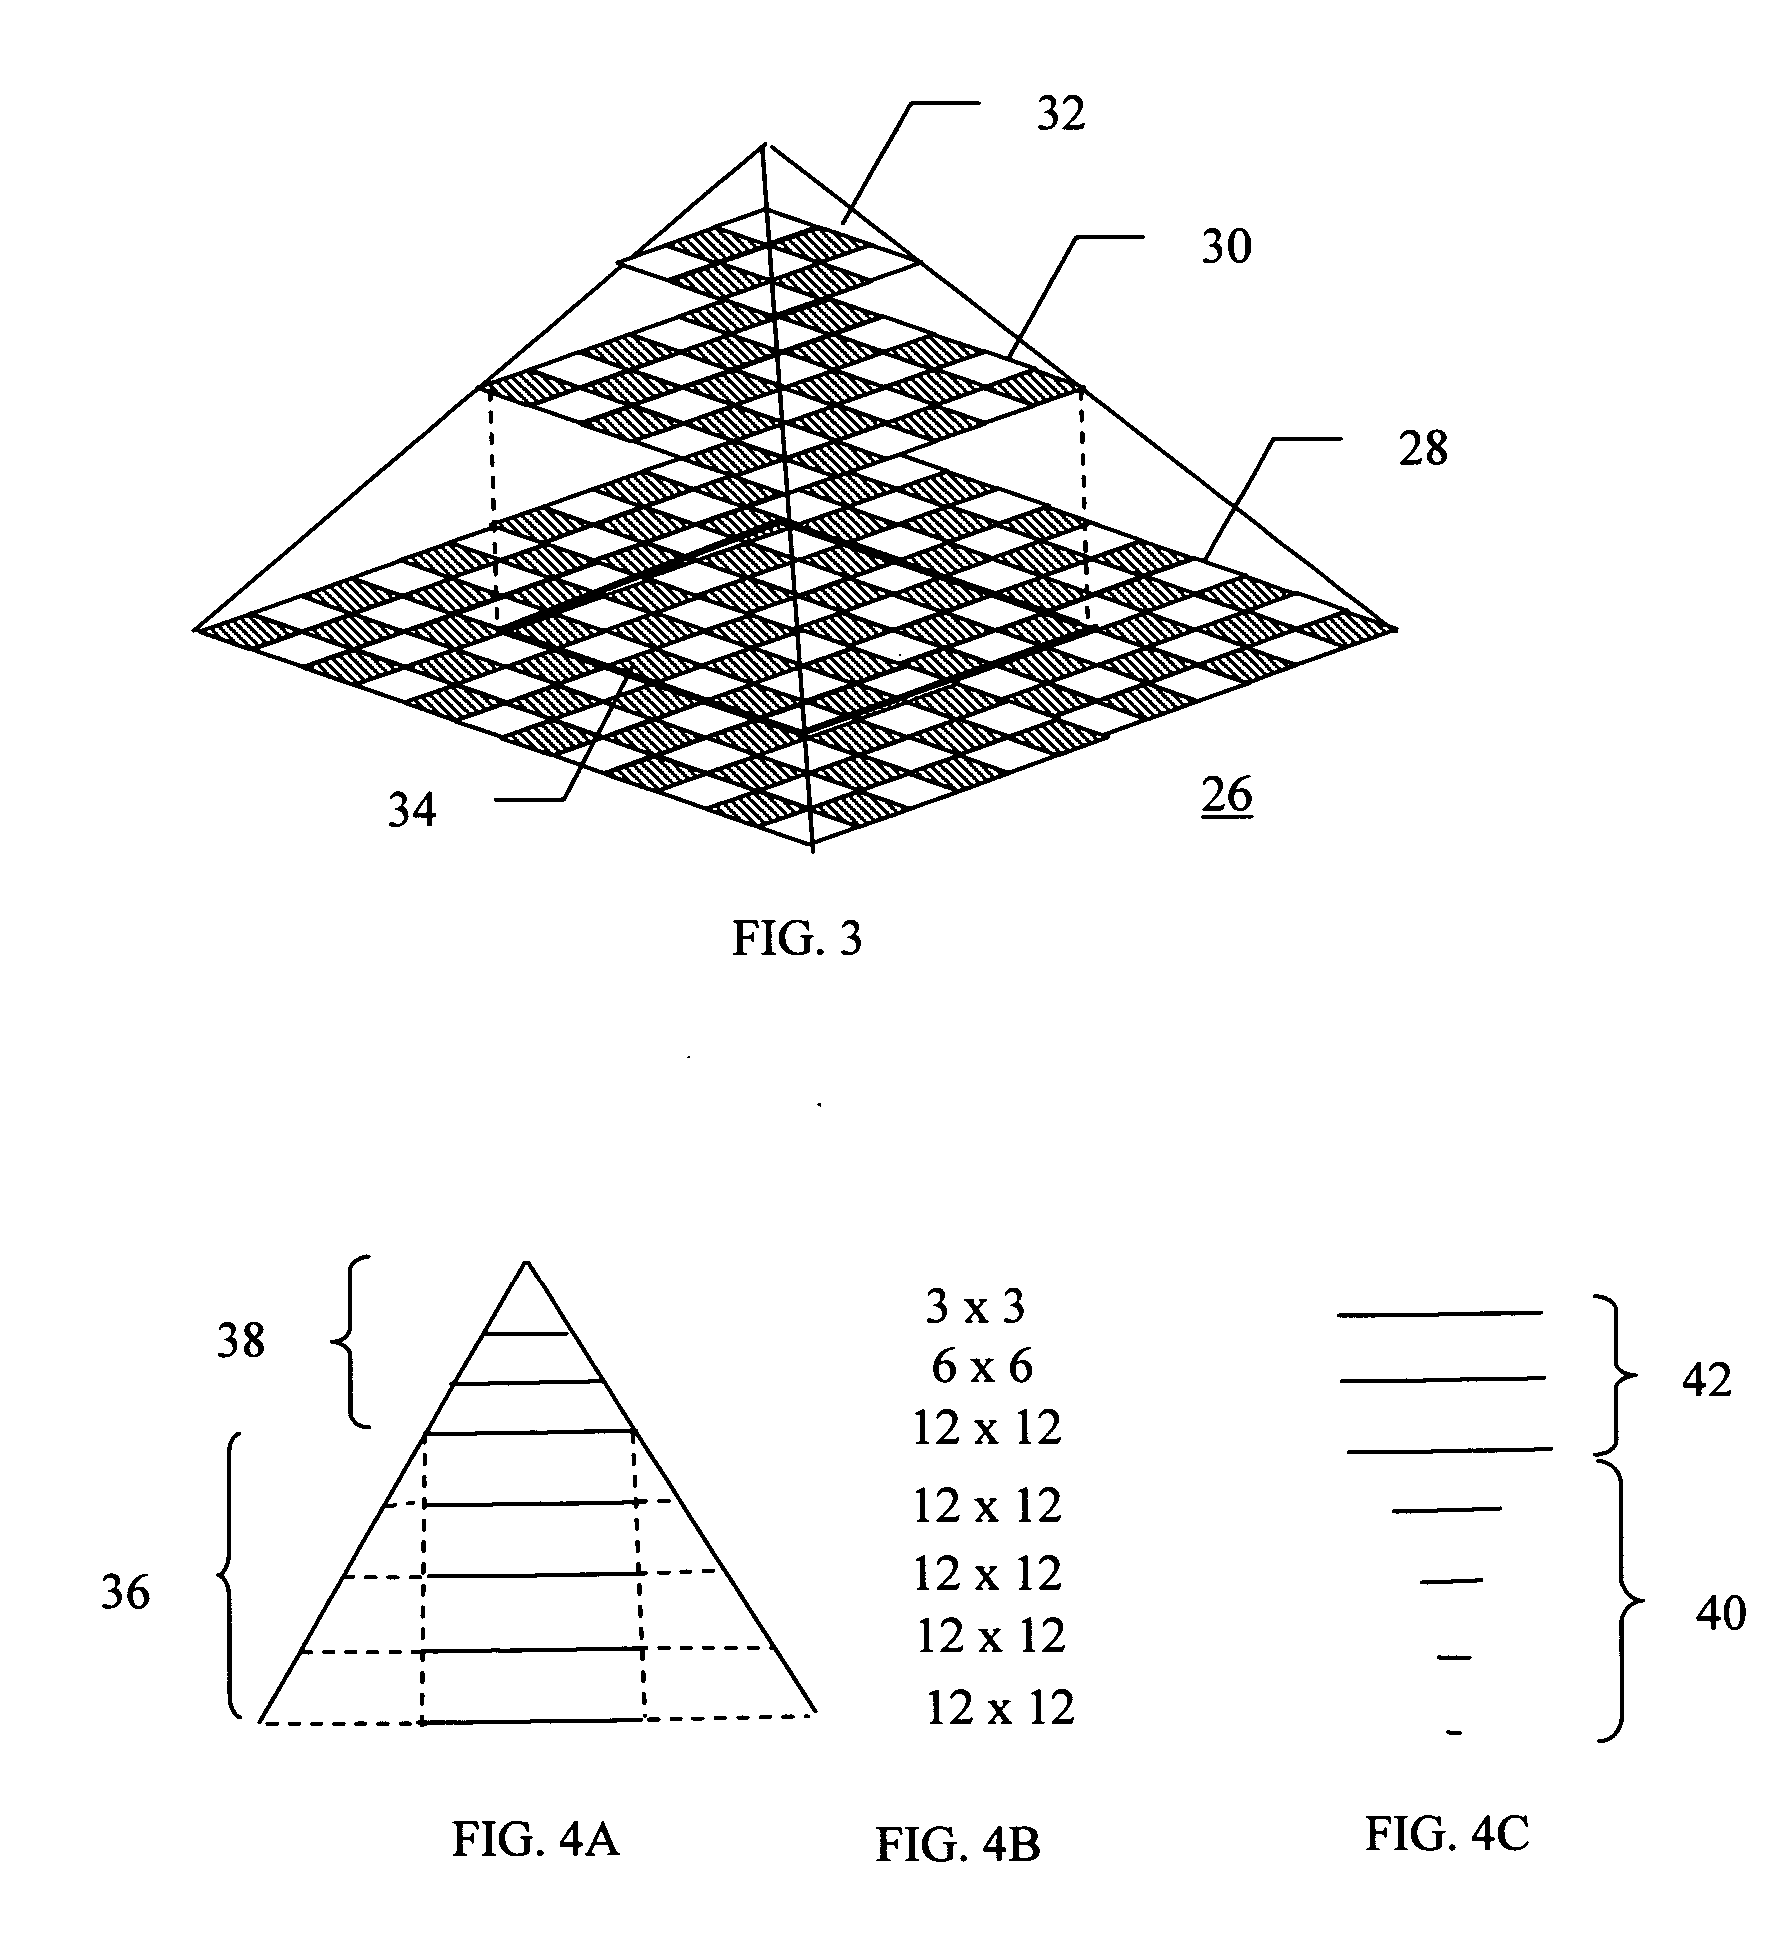 System and method for asynchronous continuous-level-of-detail texture mapping for large-scale terrain rendering